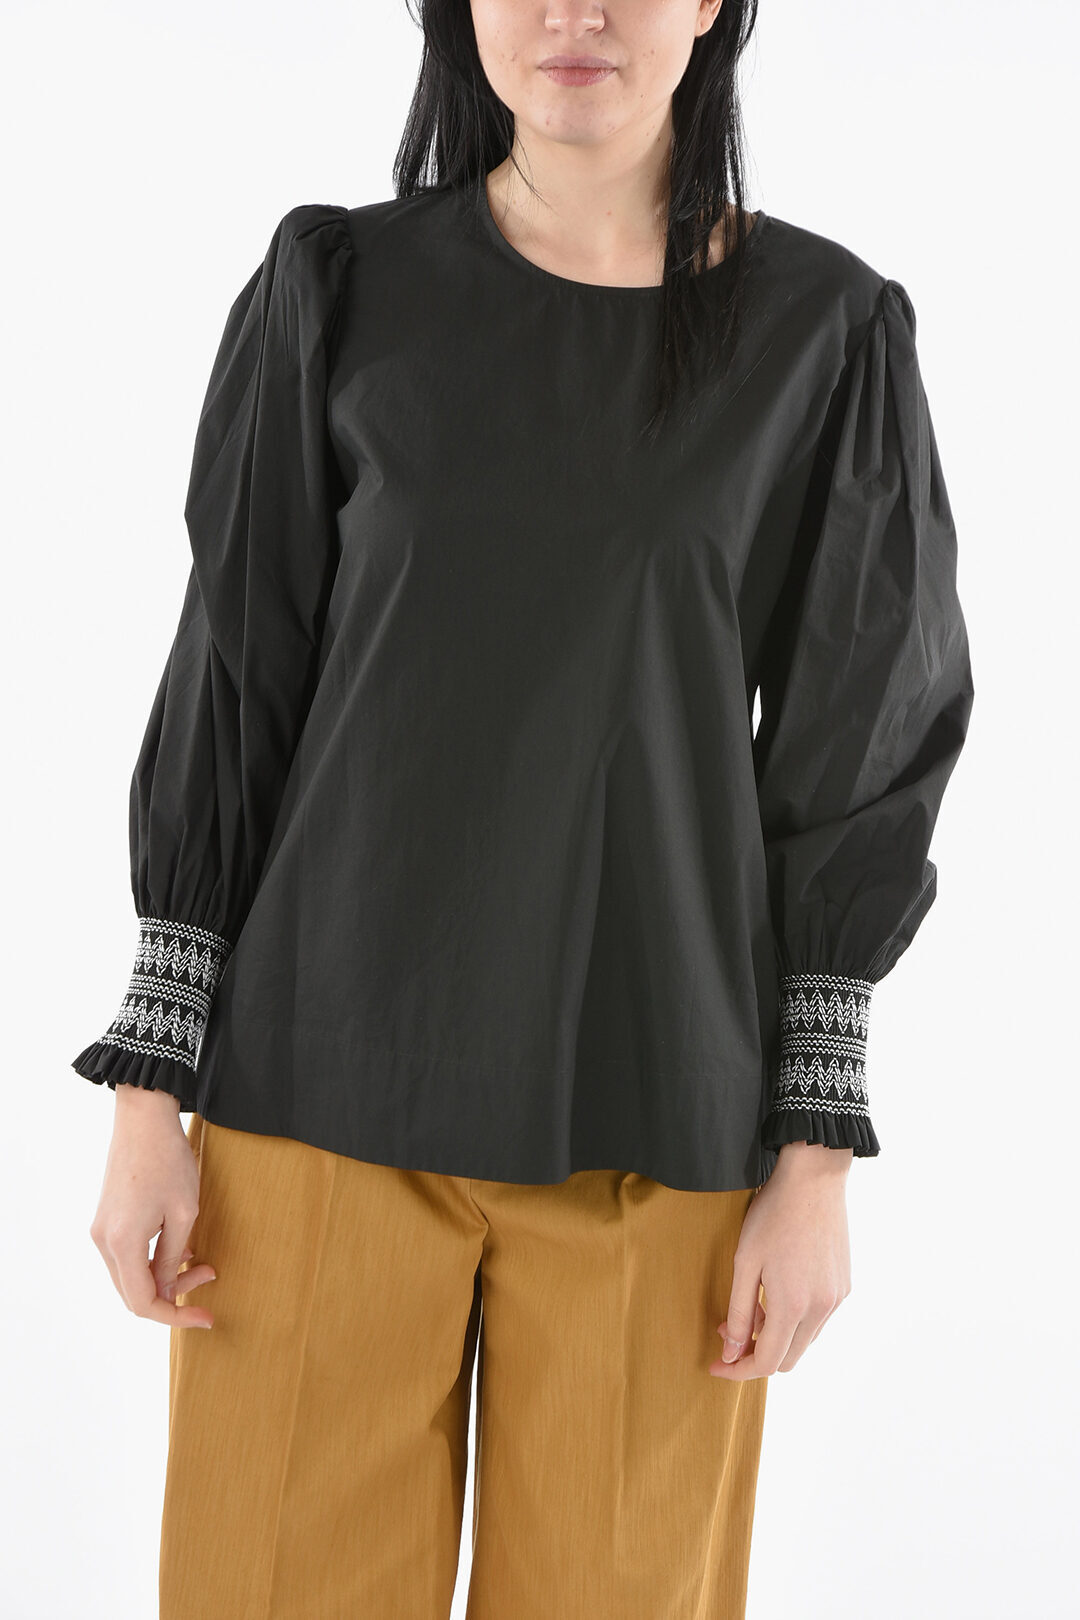 PAROSH パロシュ Black シャツ D312329.813 レディース ROUND NECK POPLIN CANYOX BLOUSE WITH EMBROIDERED SLEEVES  dk